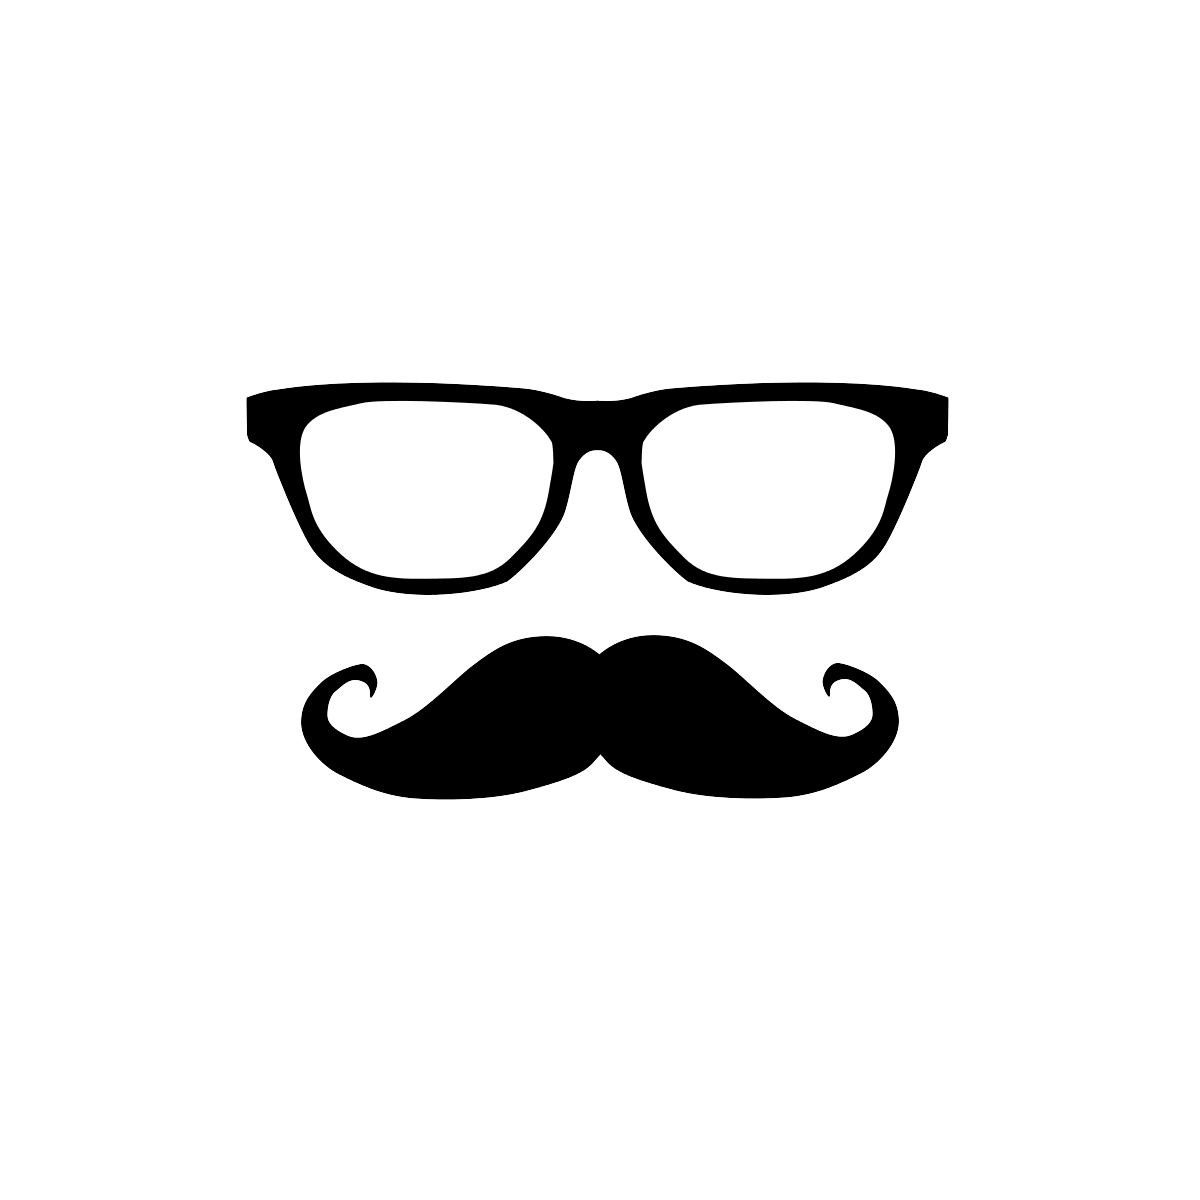 Clipart glasses gentleman. Drawn mustache pencil and